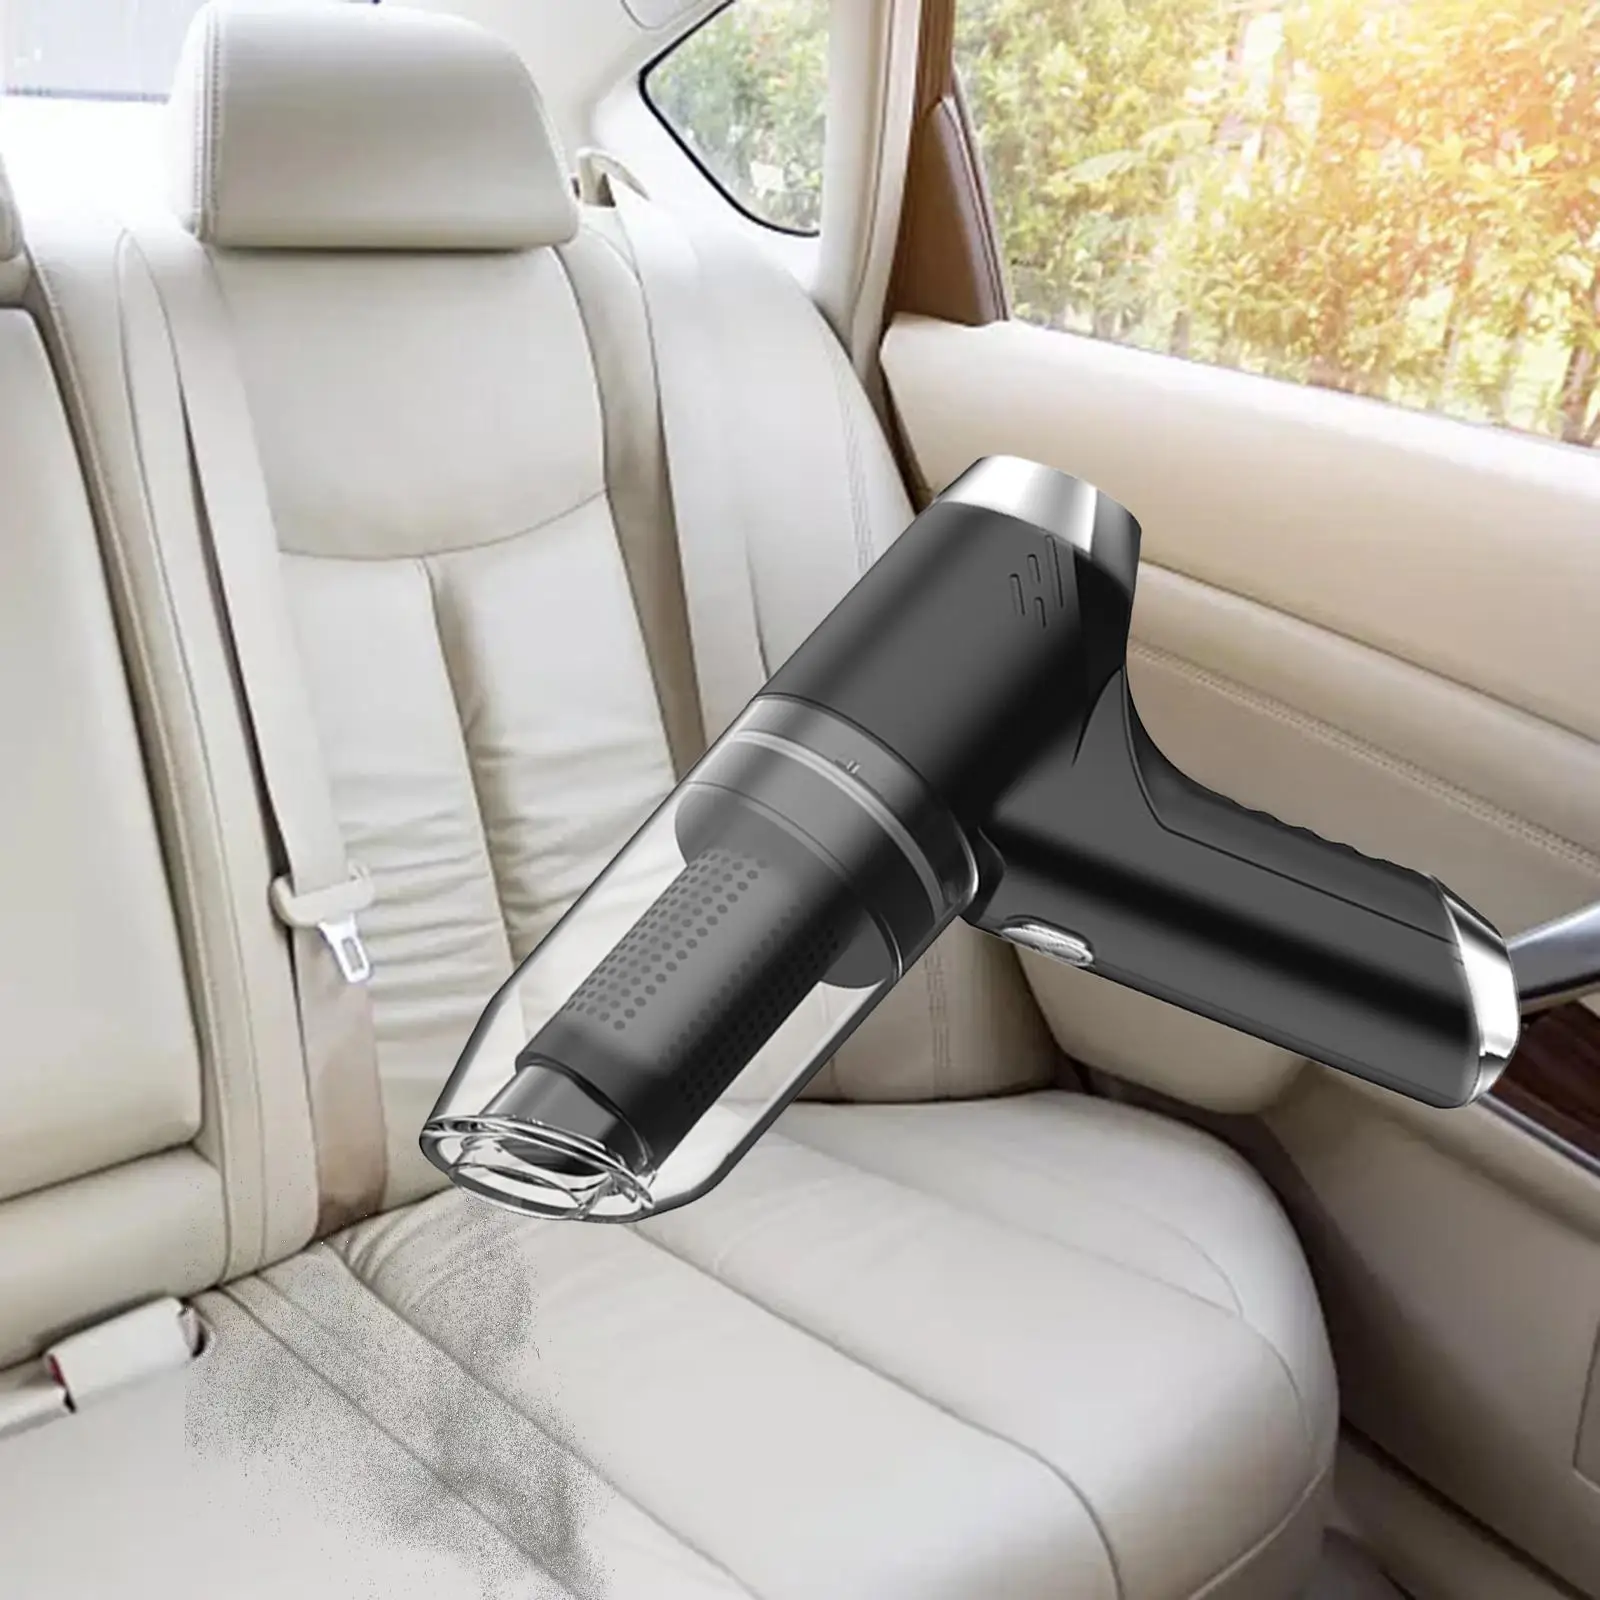 Handheld Vacuum Lightweight Cordless Auto Accessories with Nozzles Handheld Vacuum Cleaner for Pet Hair car Office Cleaning